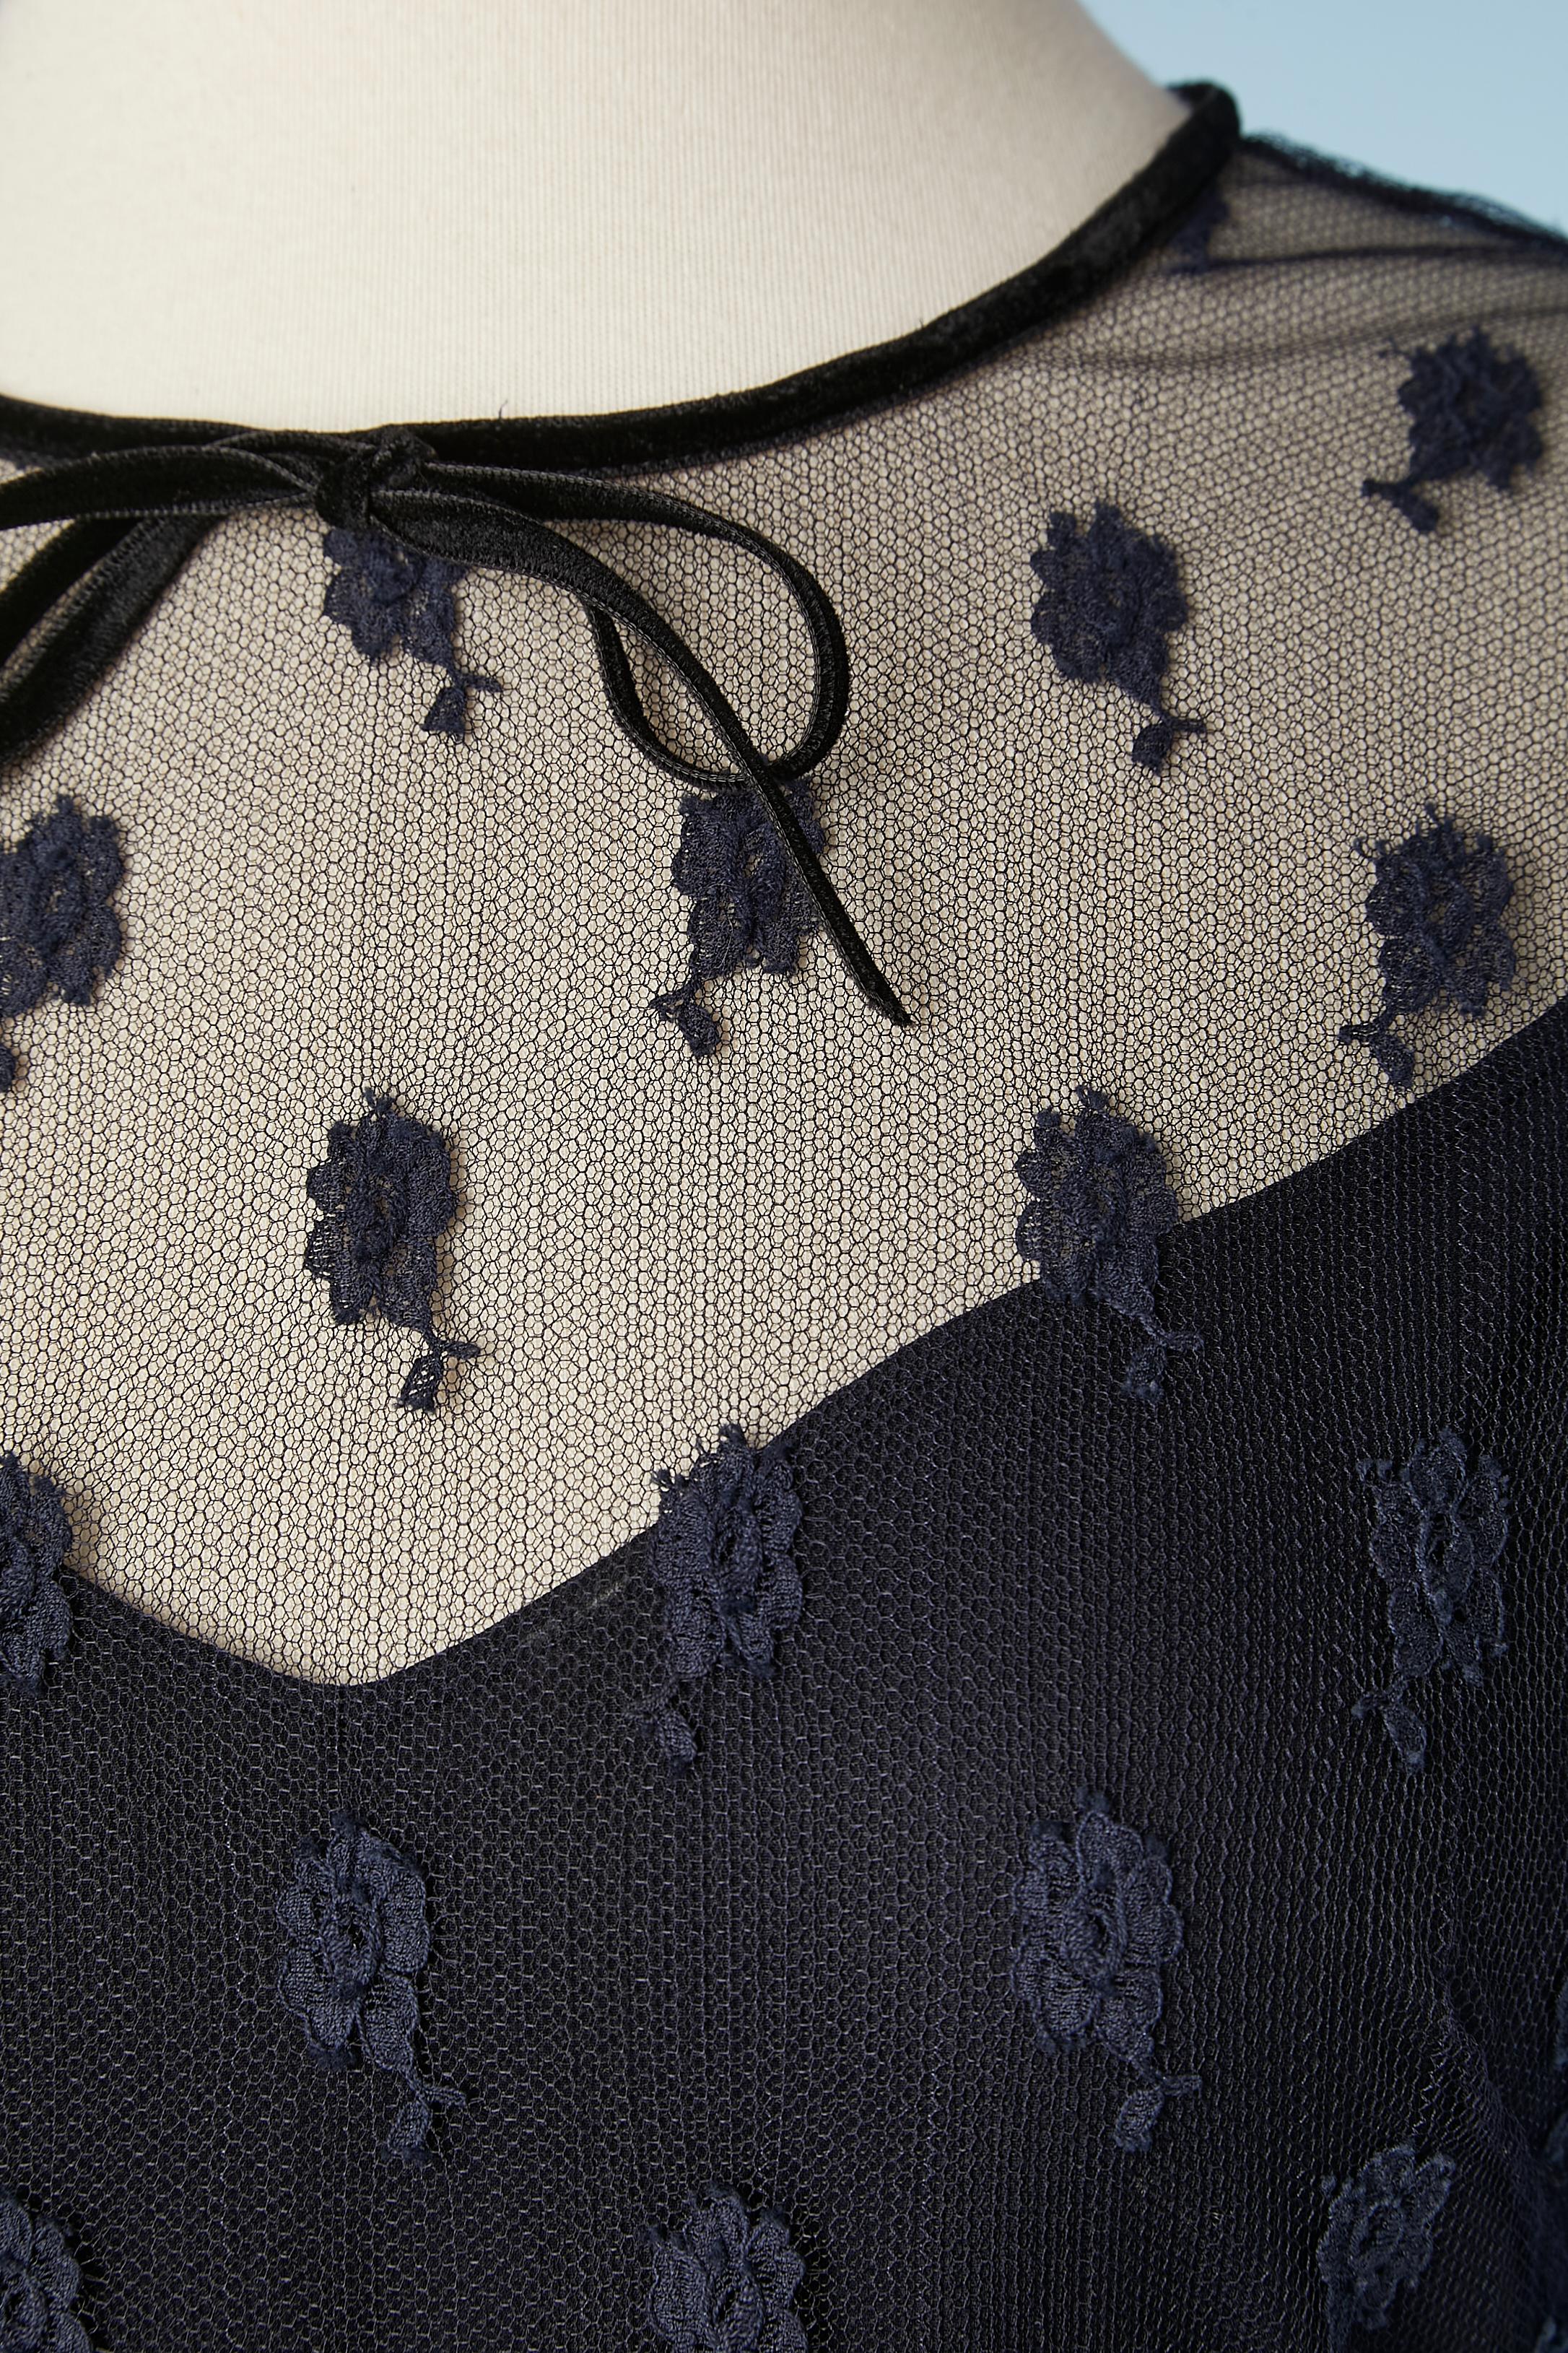 Navy blue cocktail dress in lace with black ribbons and ruffles.
Lace composition: 100% polyamide. Velvet: 50% cotton, 50% polyamide. Silk lining and silk organza lining. Zip in the middle back 
SIZE 42 (IT) 36 (Fr) S US 